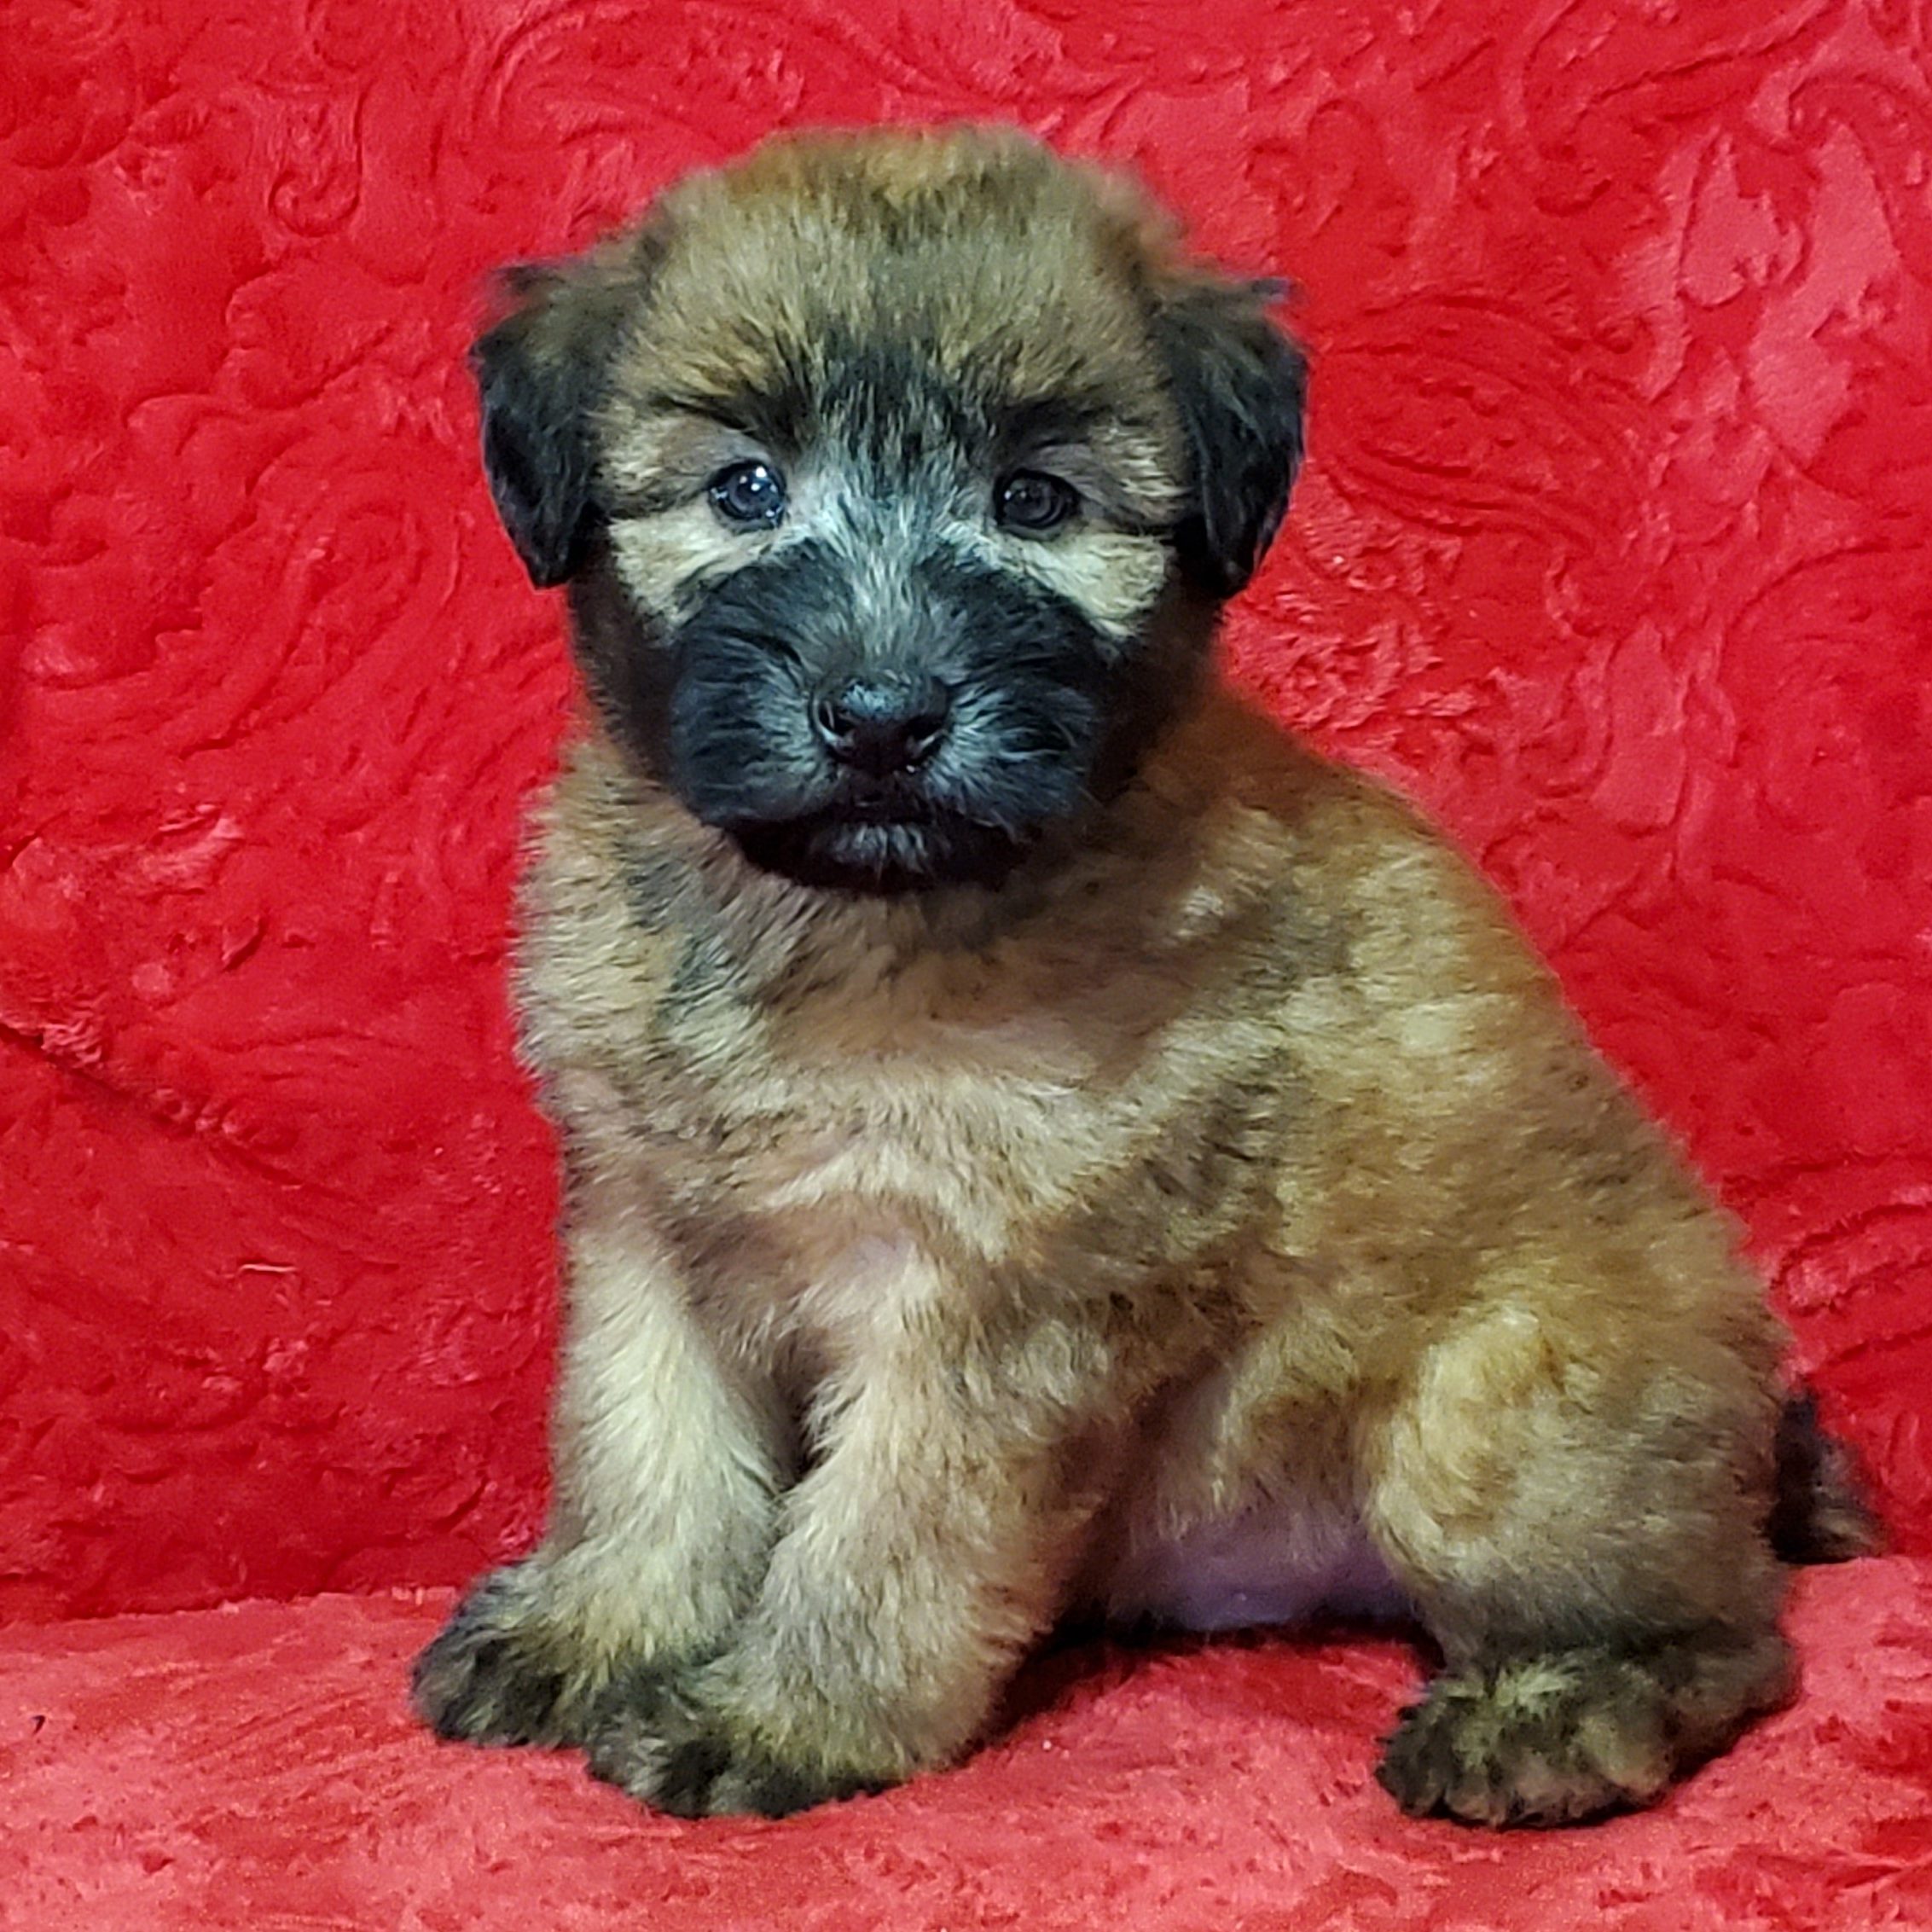 Puppy from previous litter